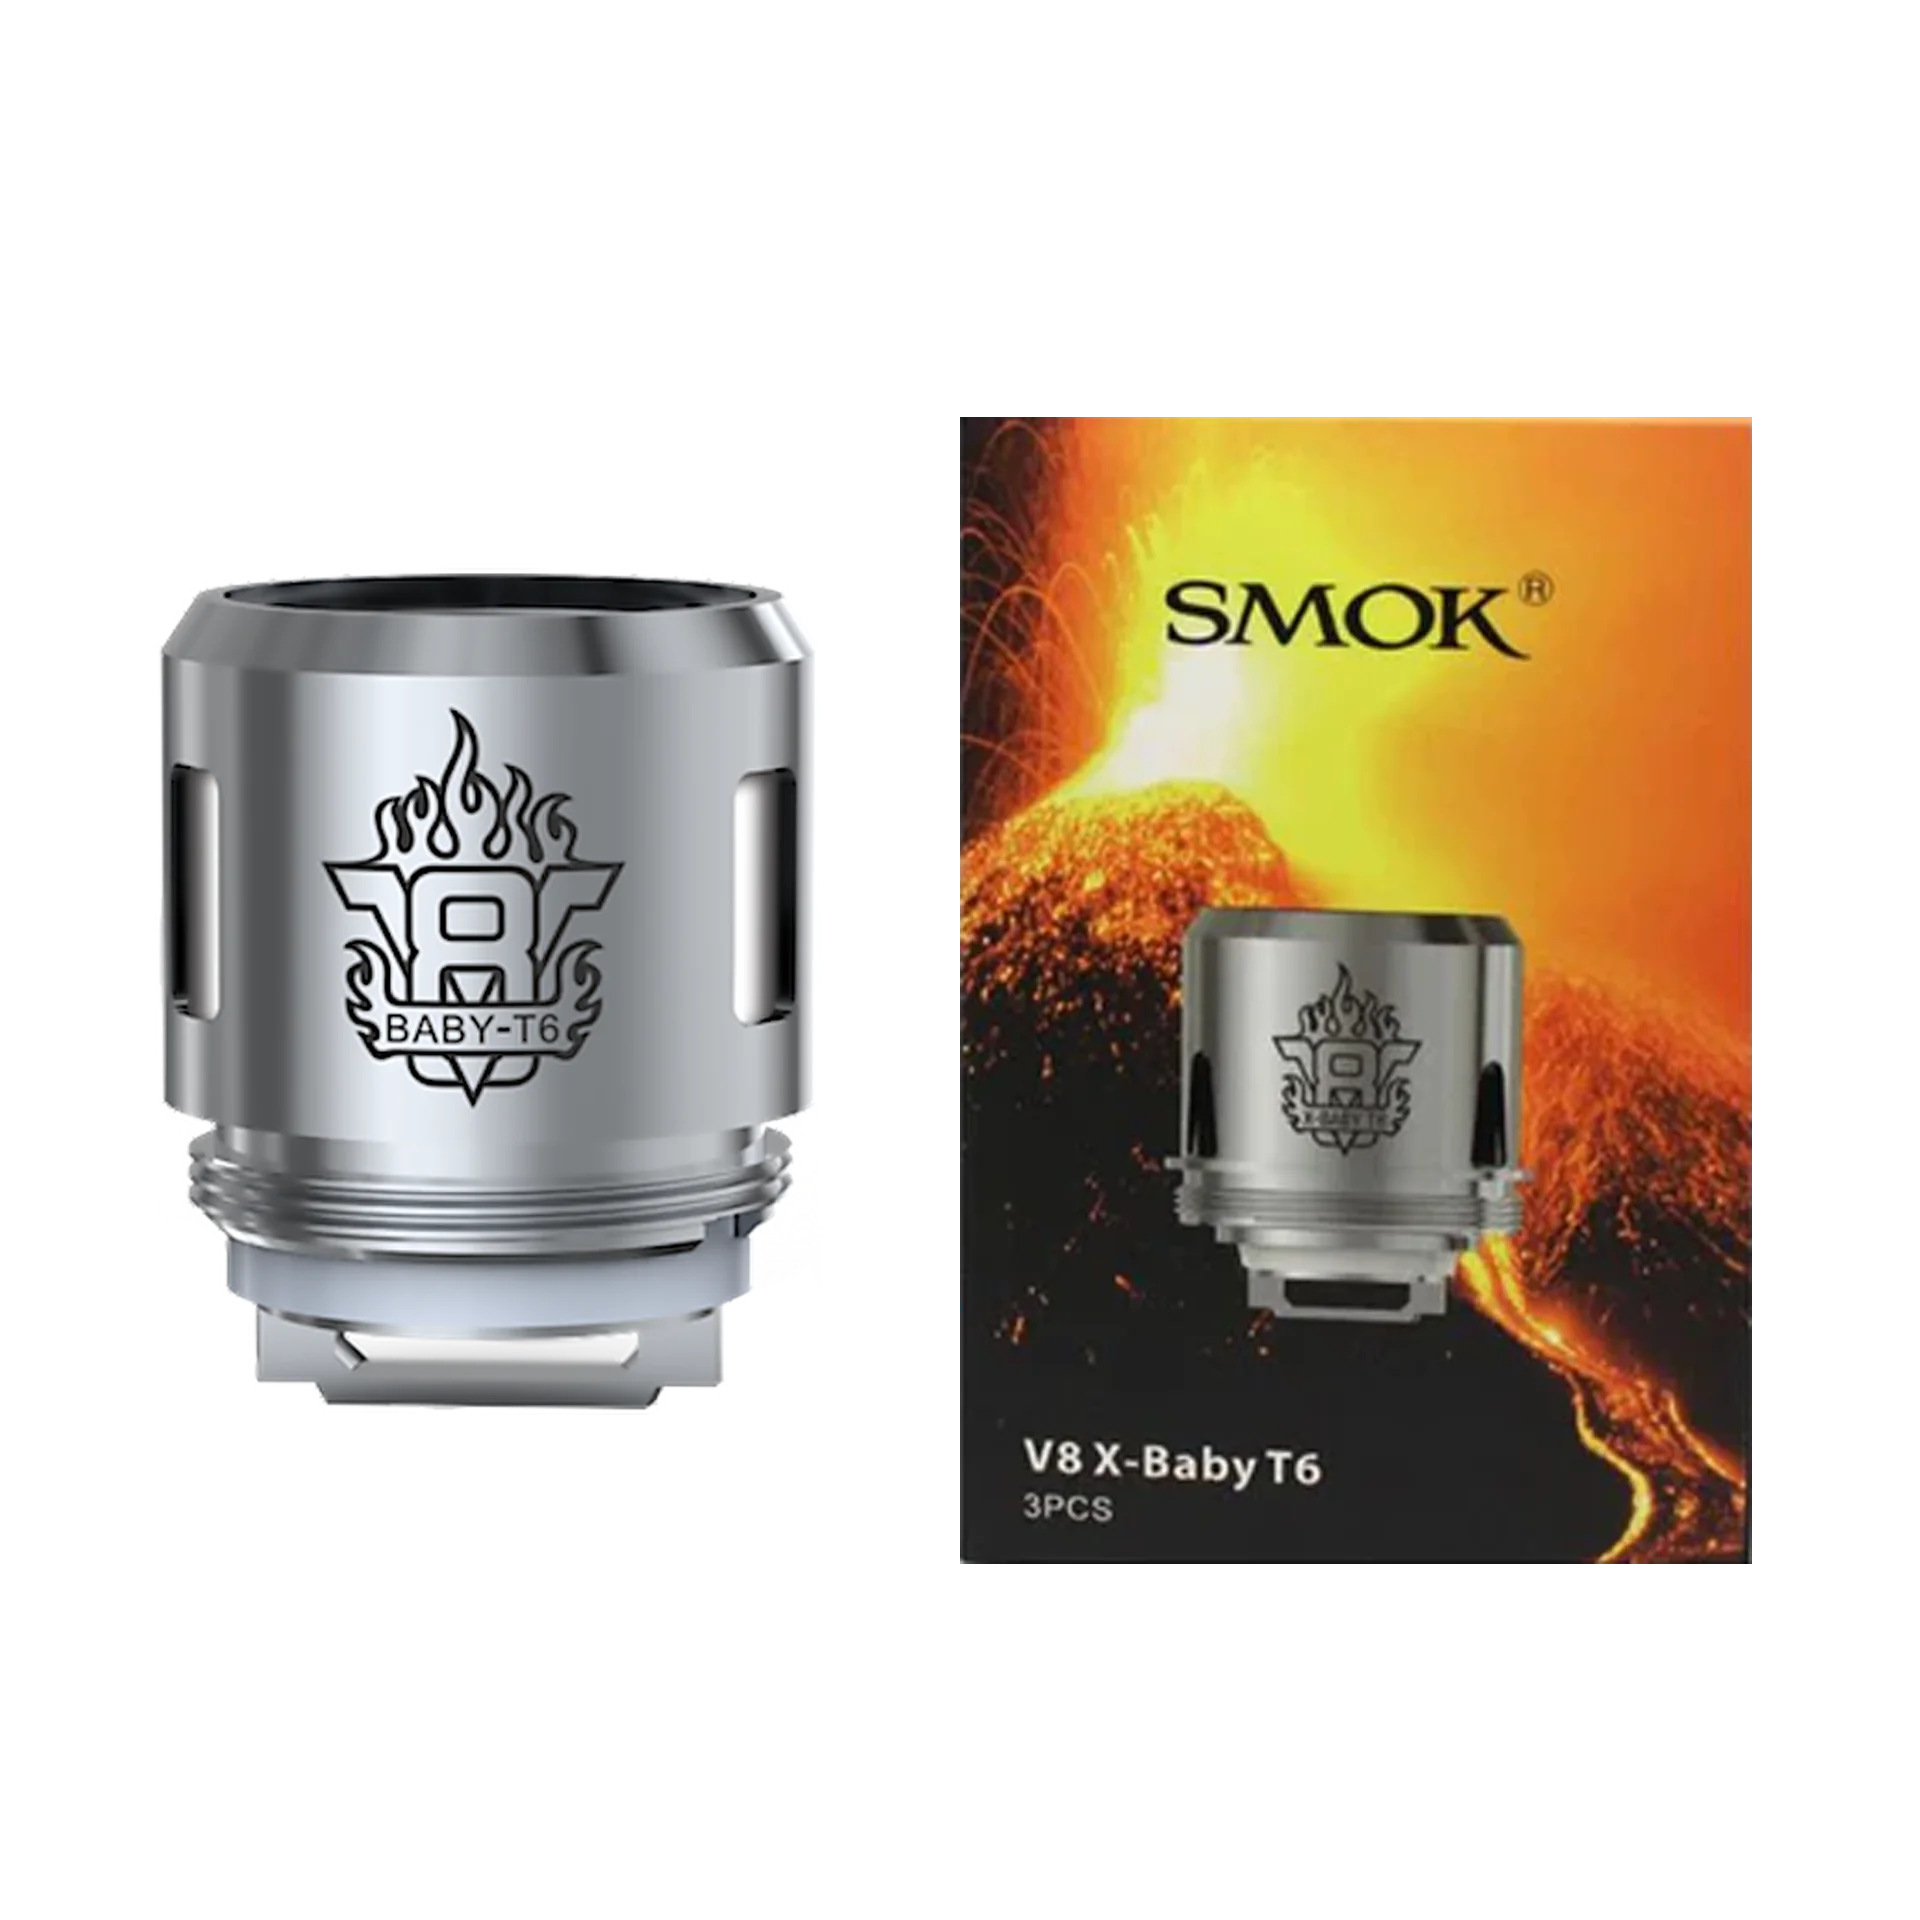 Smok V8 X-Baby T6 Replacement Coils